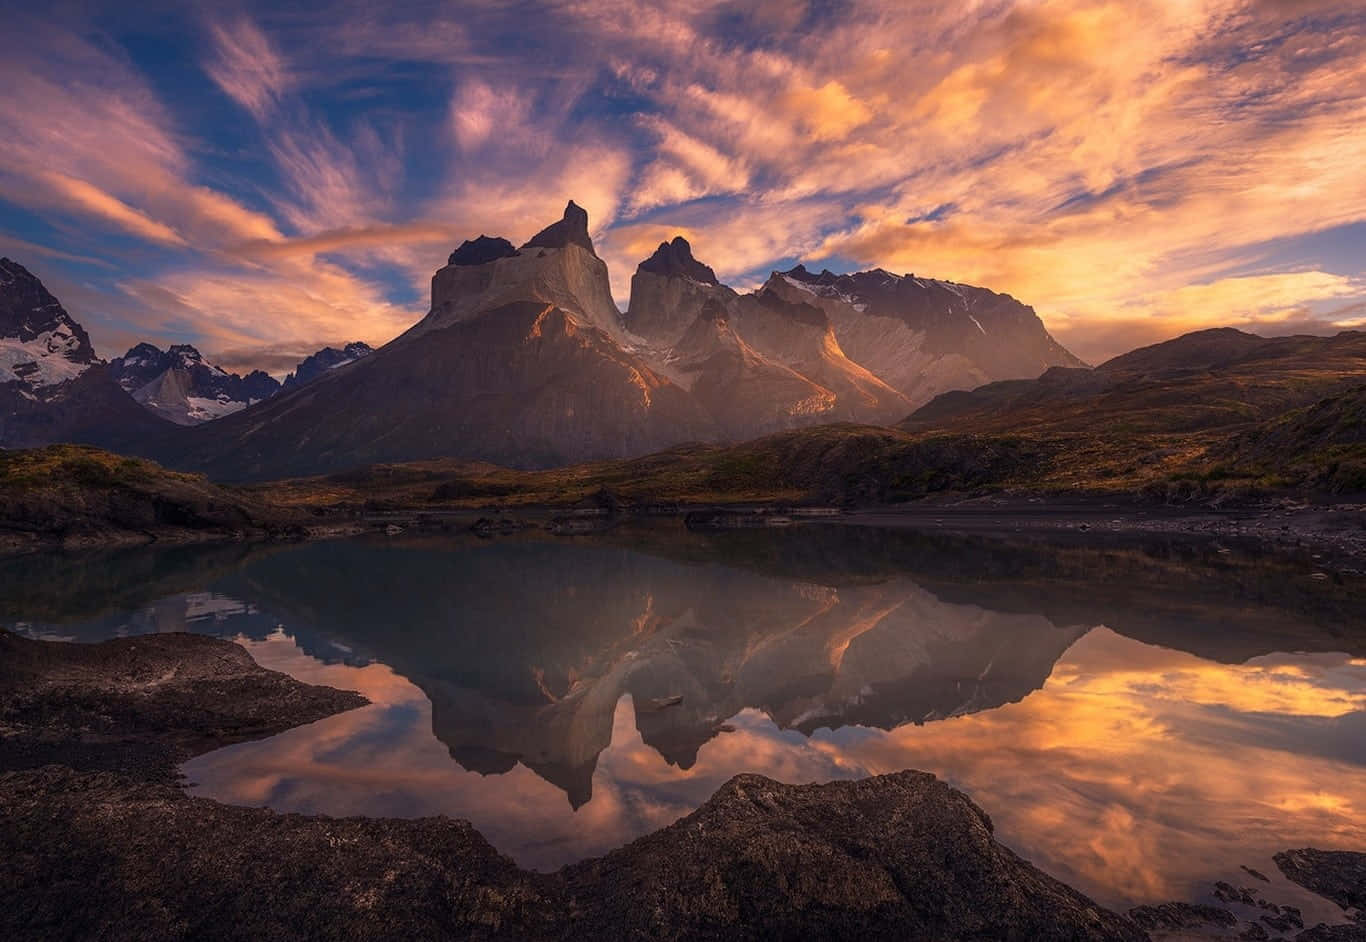 A Mountain Range Is Reflected In A Lake At Sunset